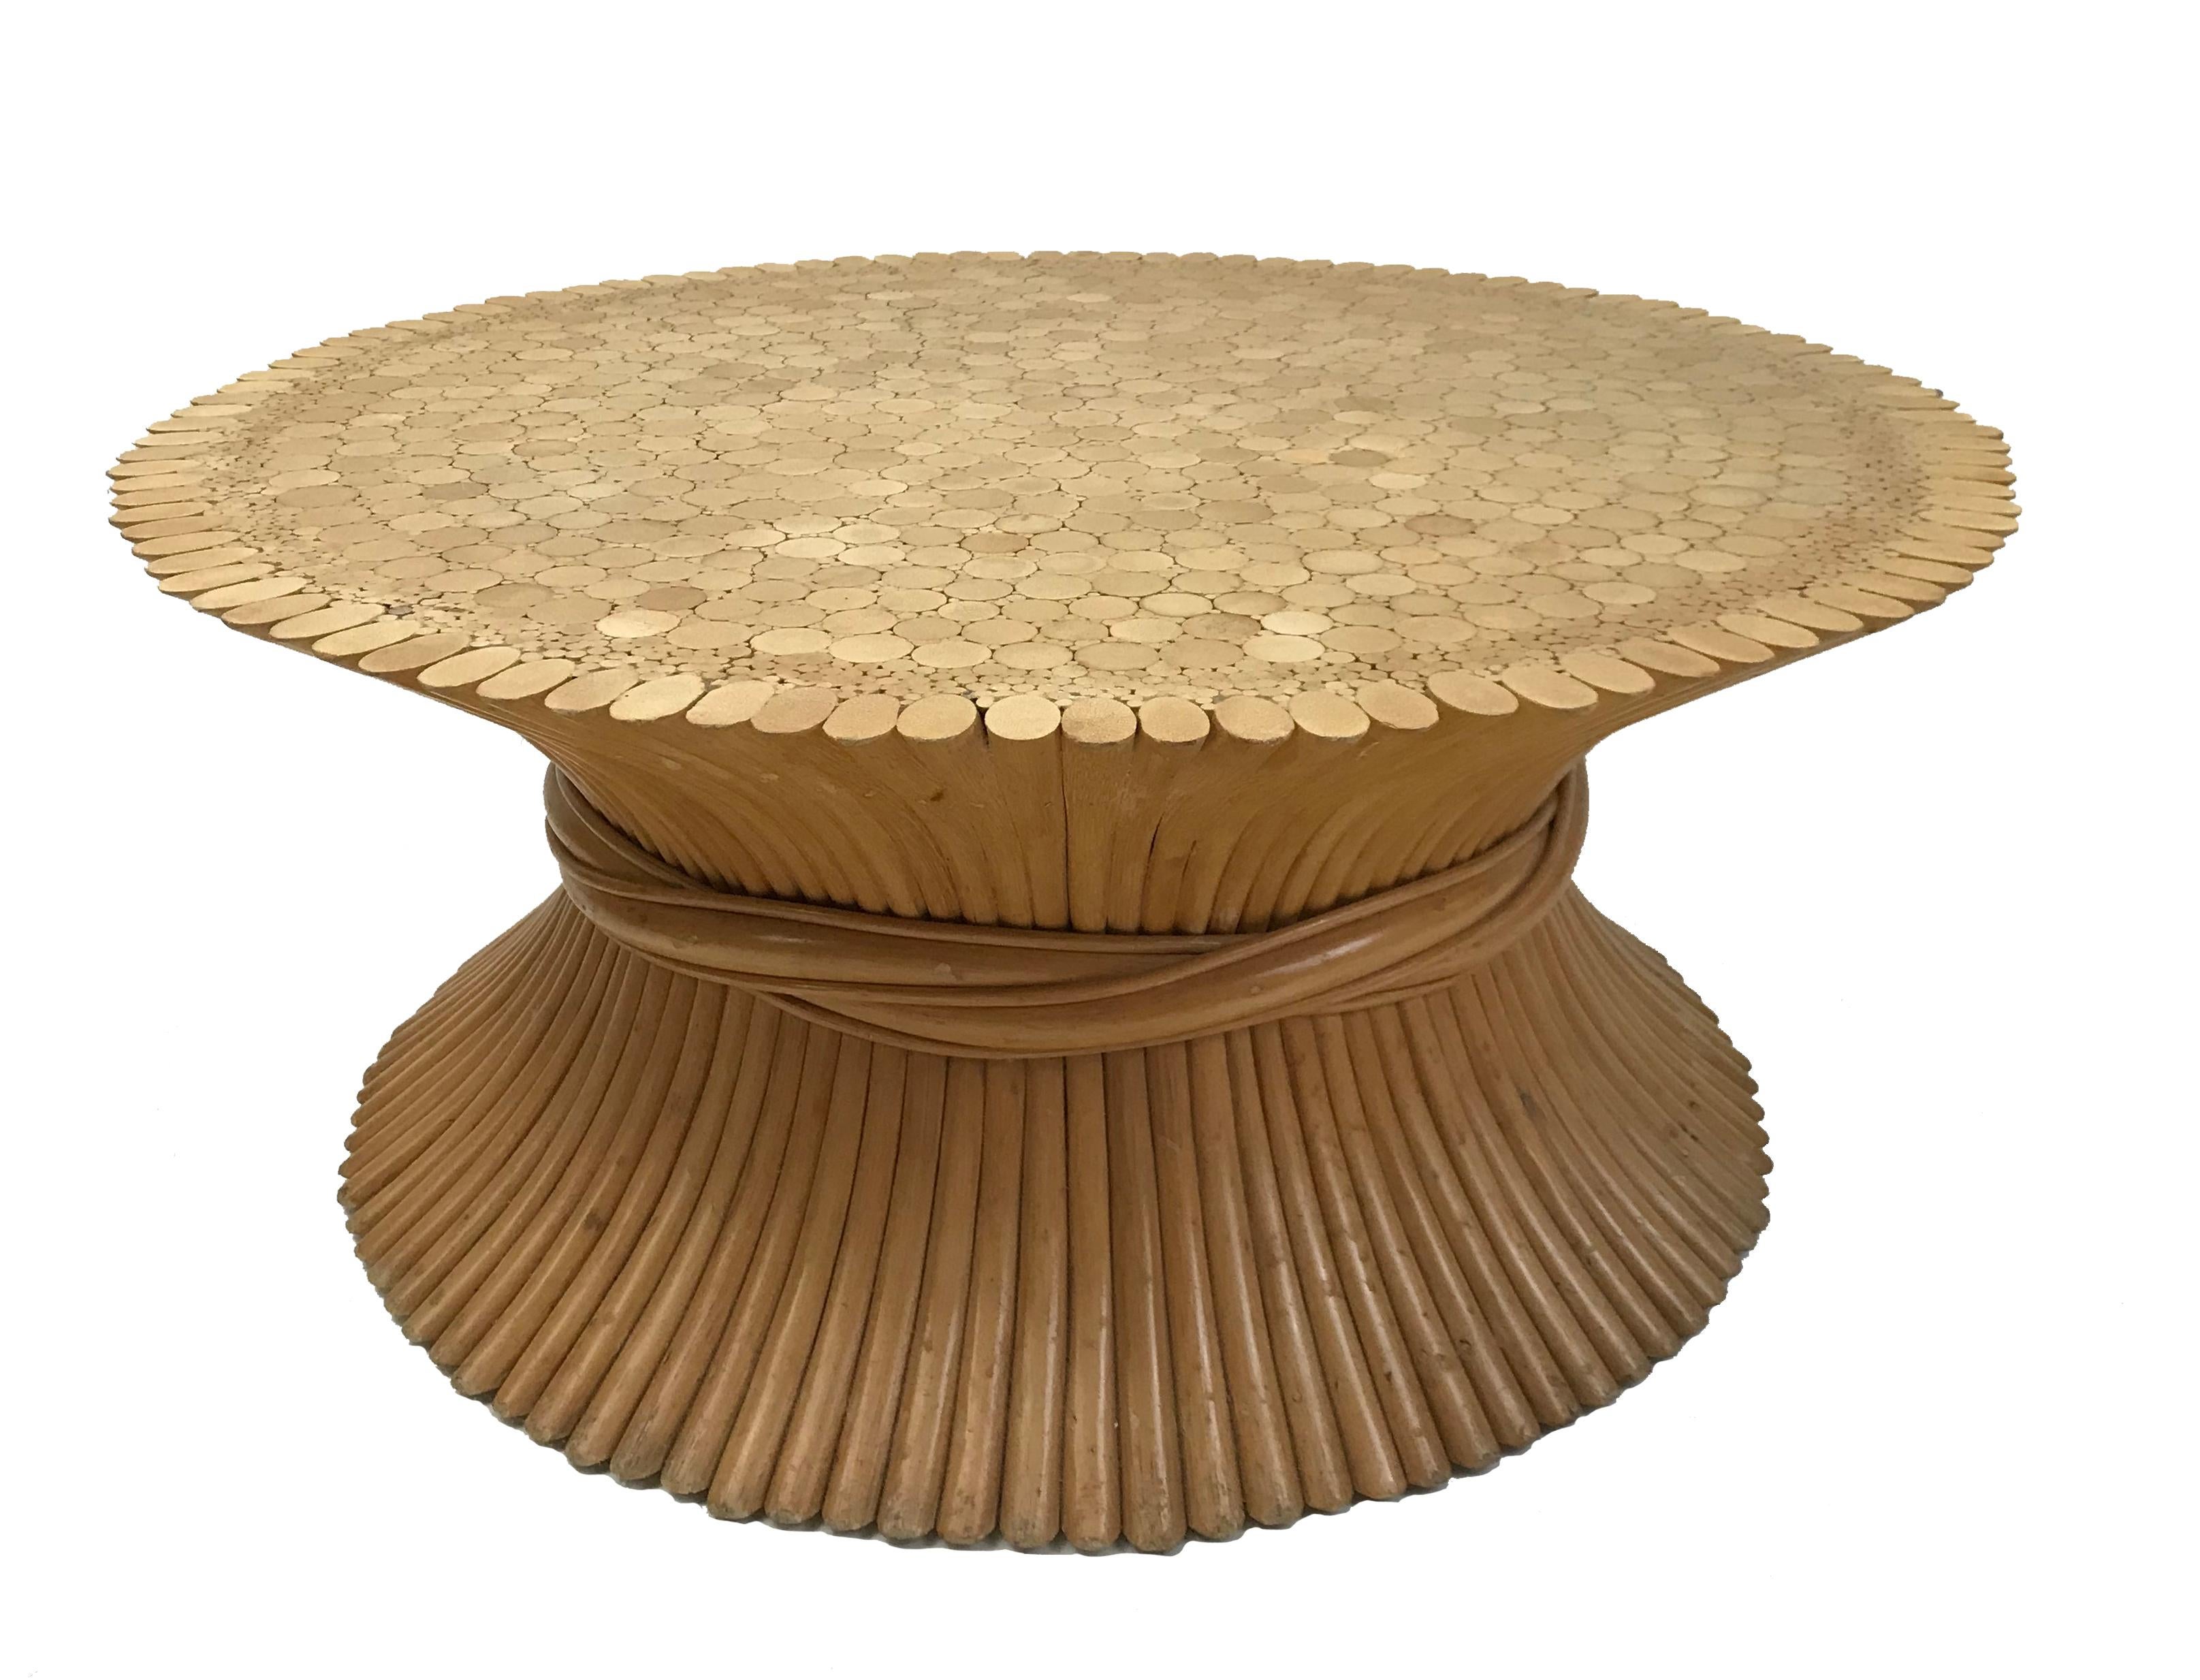 Lacquered McGUIRE MIDCENTURY Bamboo Wheat Sheaf Coffee Table - Hollywood Regency Style 70s